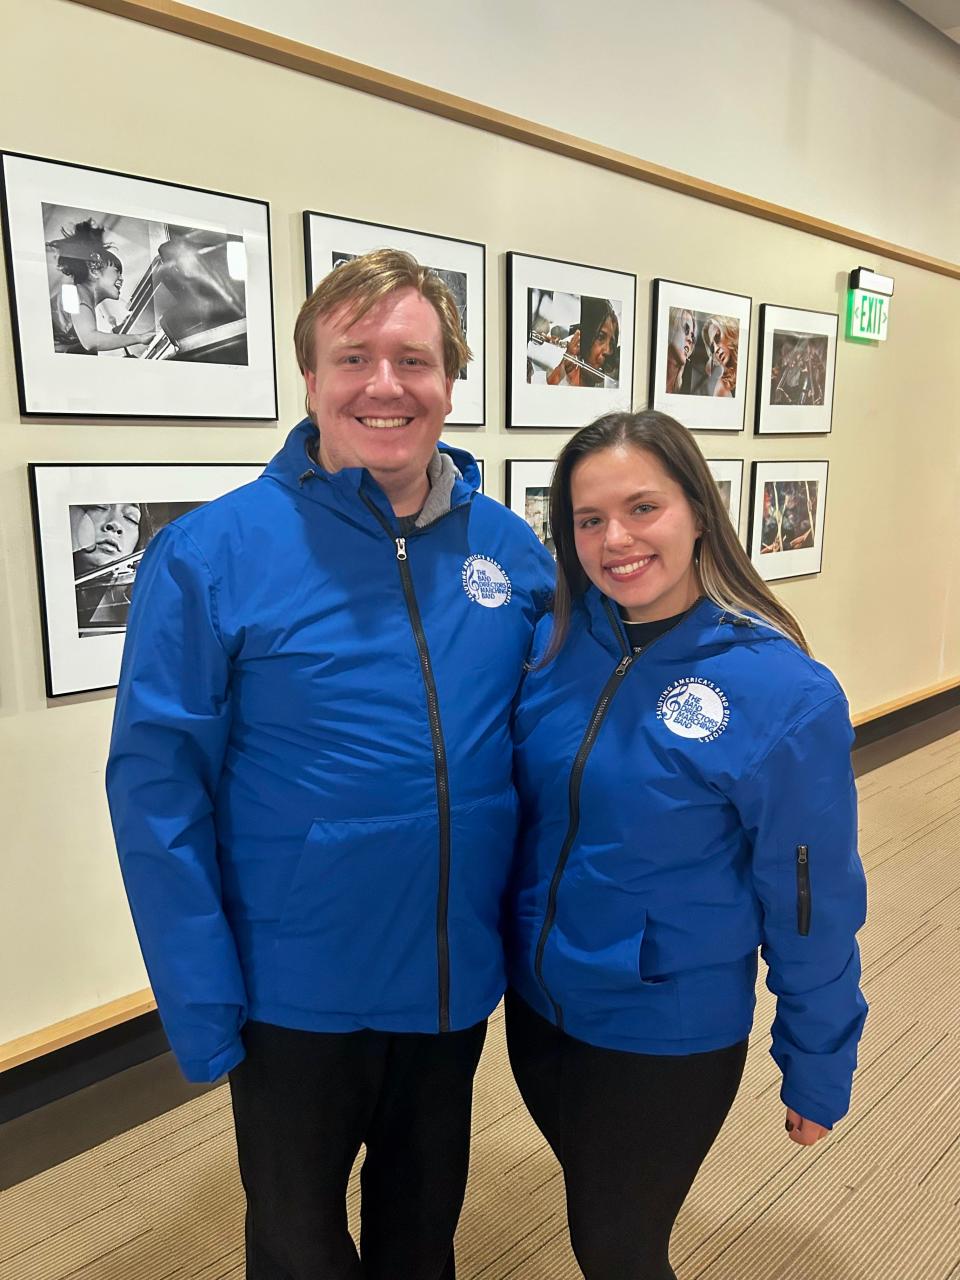 Scott Travers and Samantha Hackenson, music teachers from Rhode Island, will be representing the state as a part of "The Band Directors Marching Band" in Thursday's Macy's Thanksgiving Day Parade.